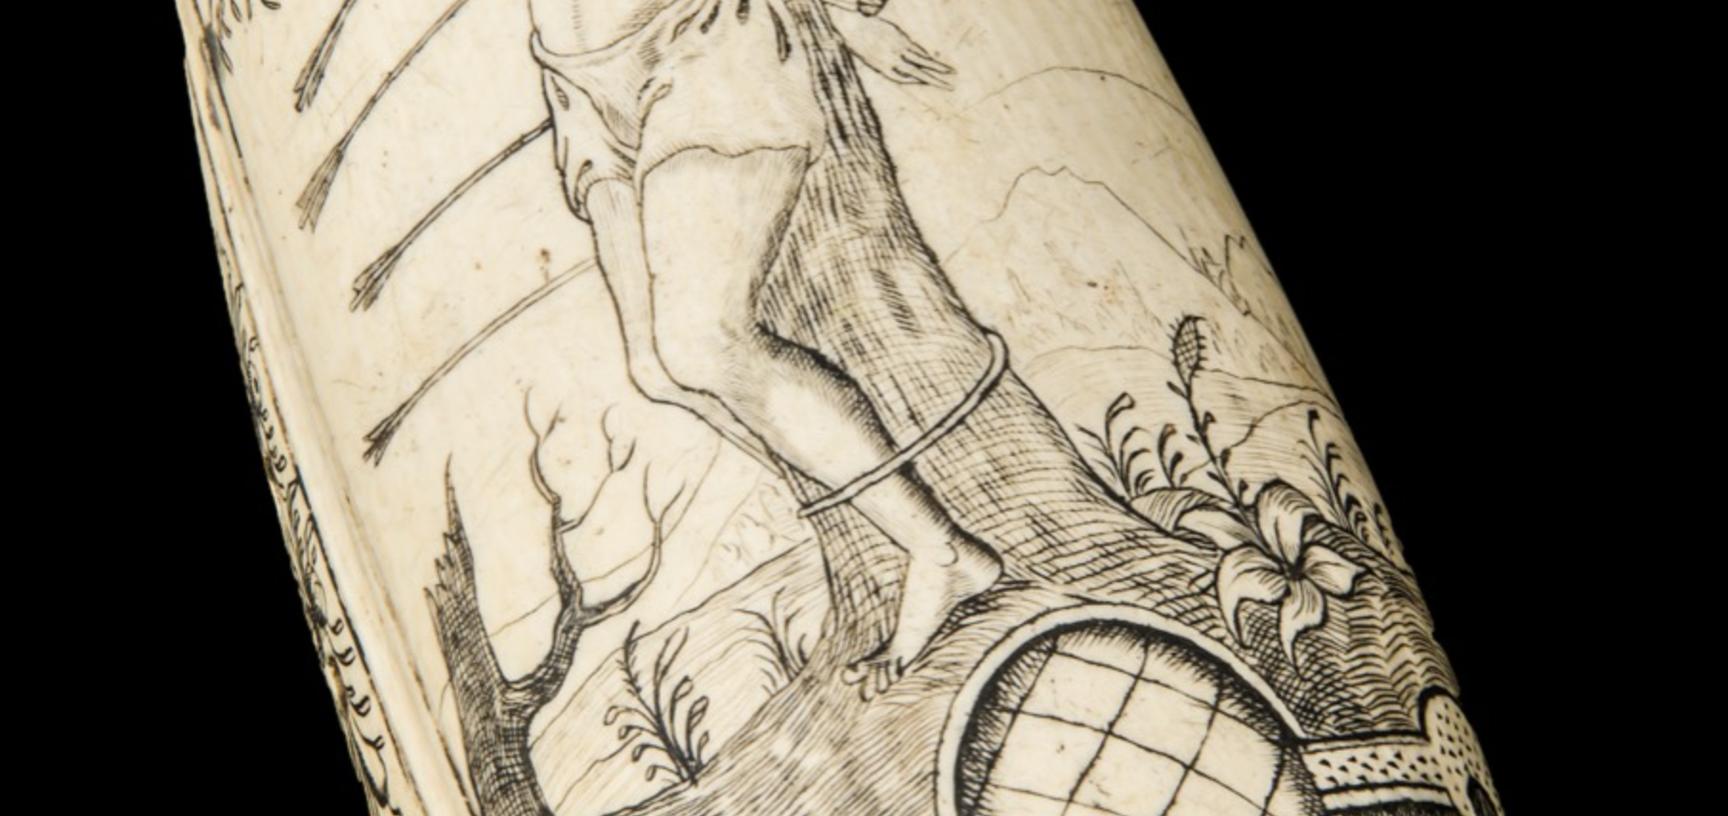 Curved sheet of ivory incised with image of St Sebastian tied to a tree and infilled with black ink.